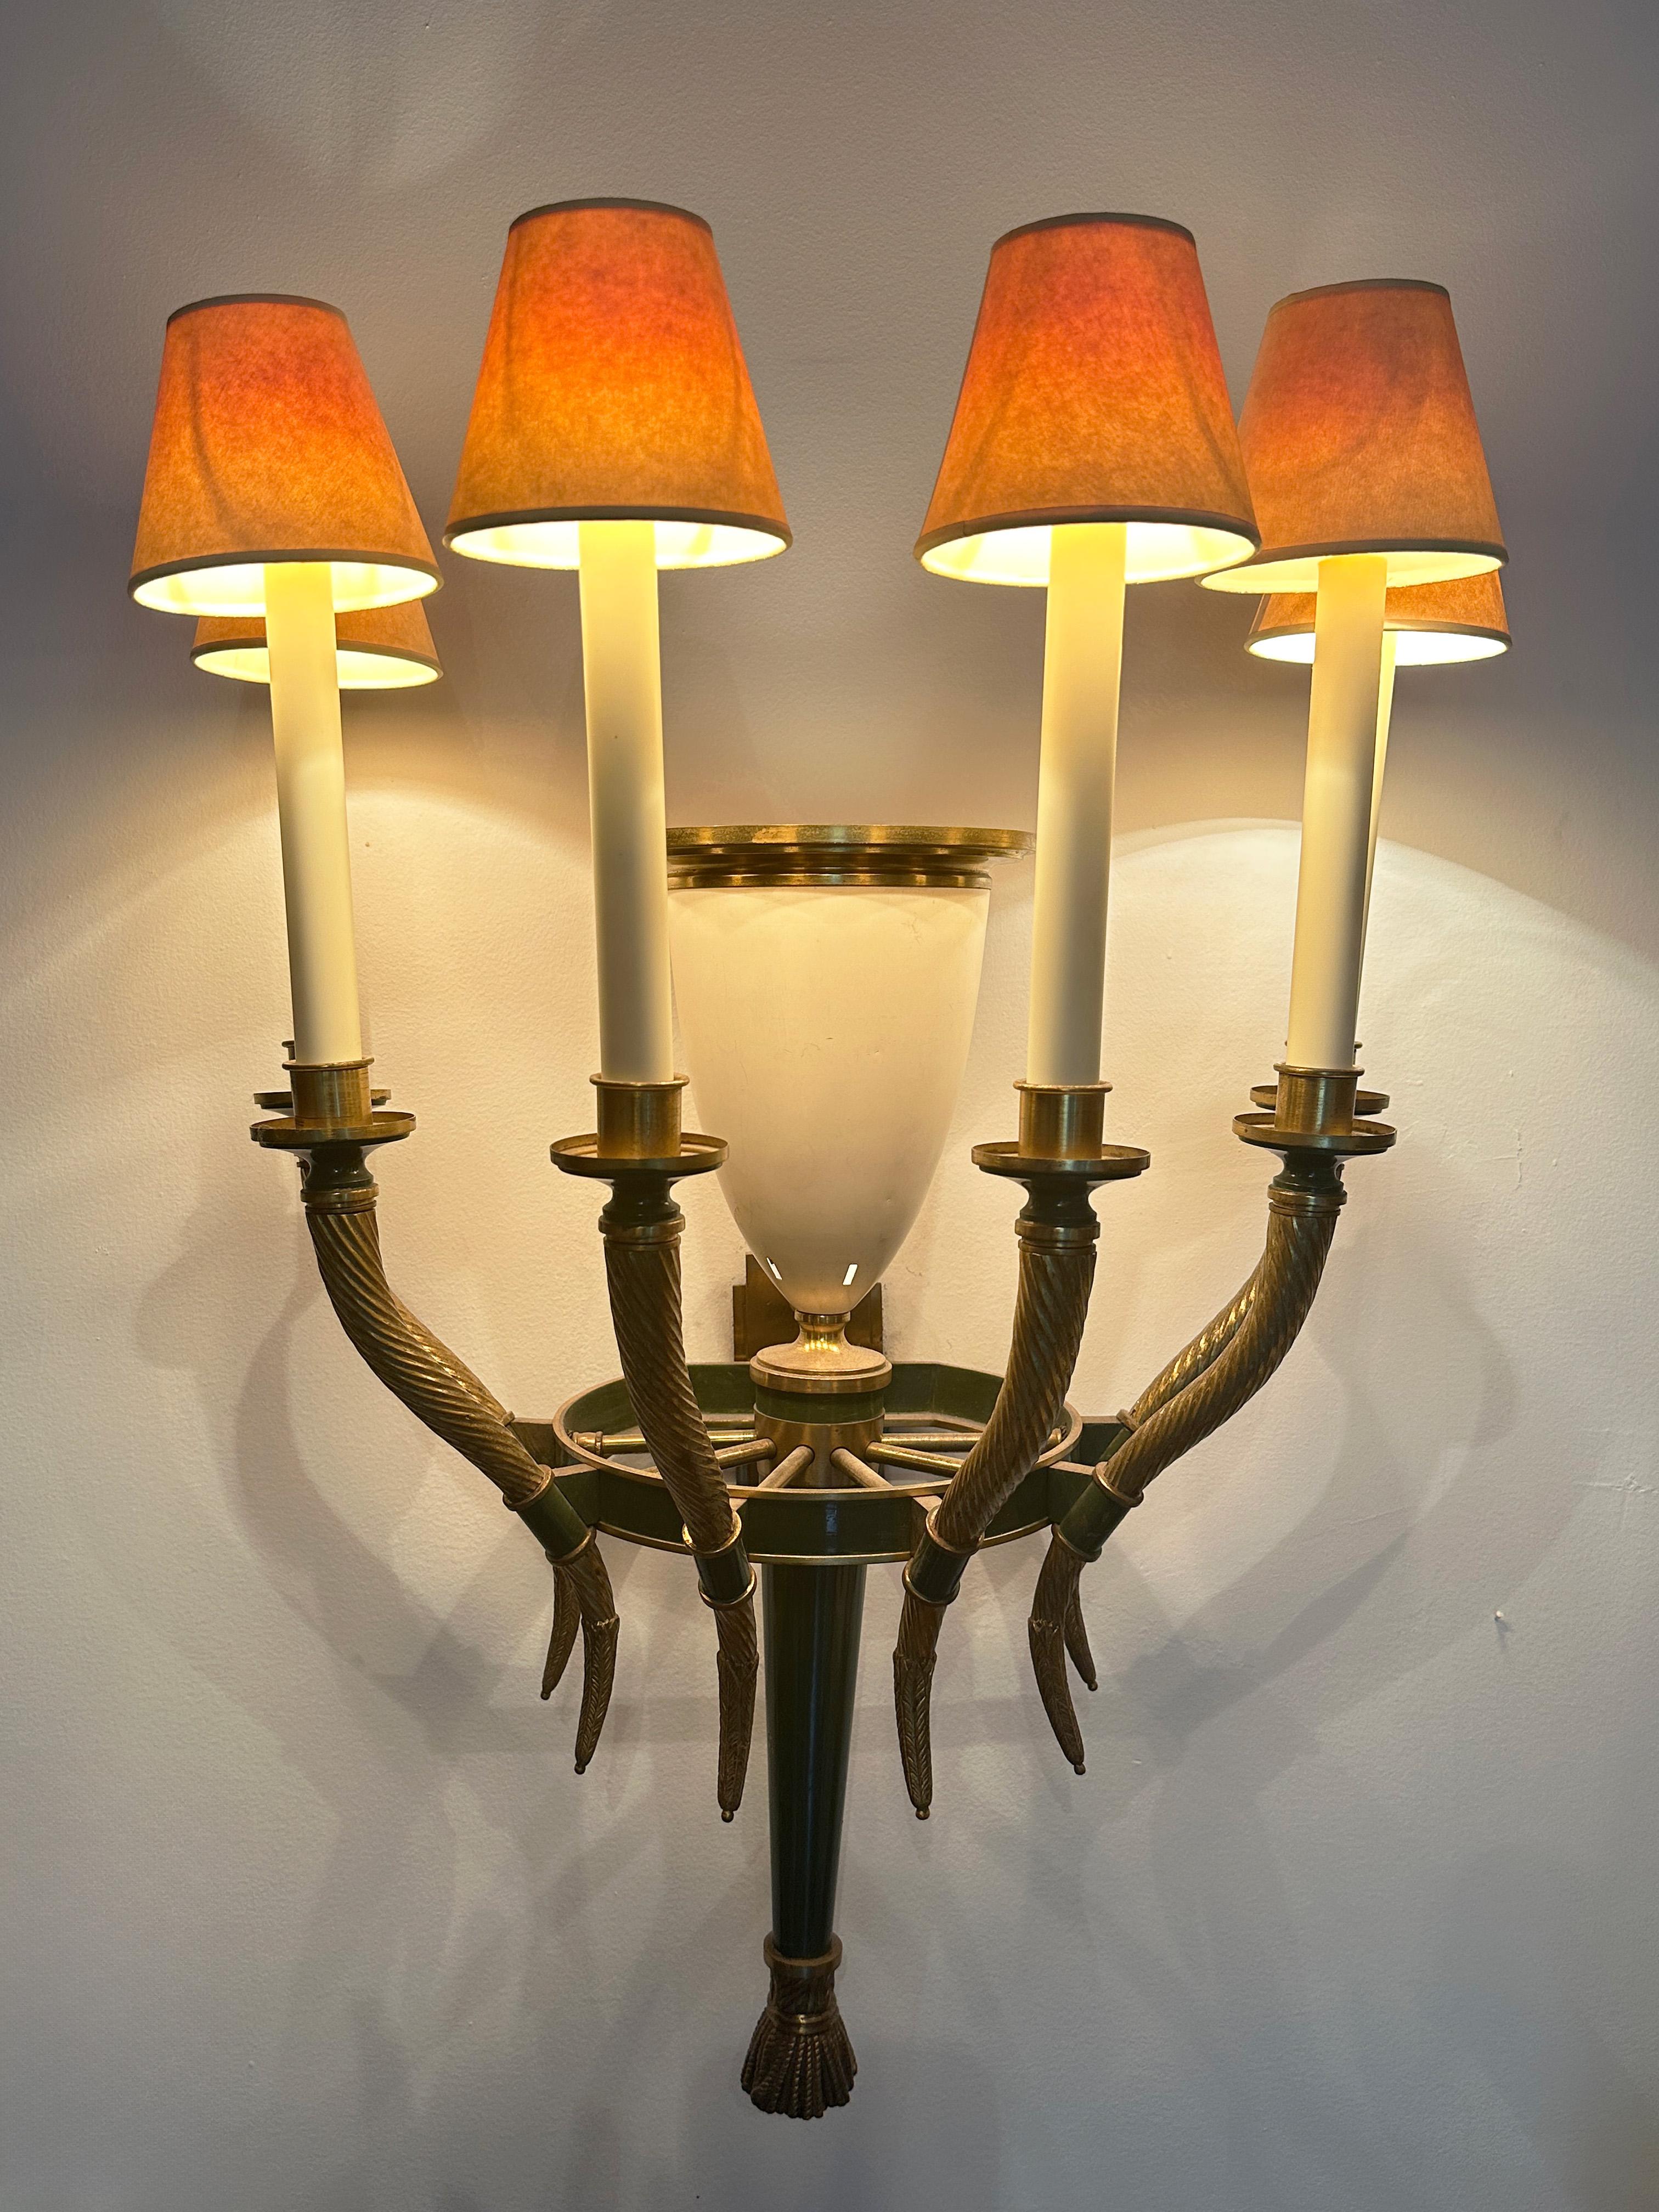 Large brass wall sconce with green paint detals. This beautiful and unique piece has 6 arms that surround the main center white metal light bowl with a brass stepped ring. Each arm has a candle stick light source that holds a candelabra light bulb